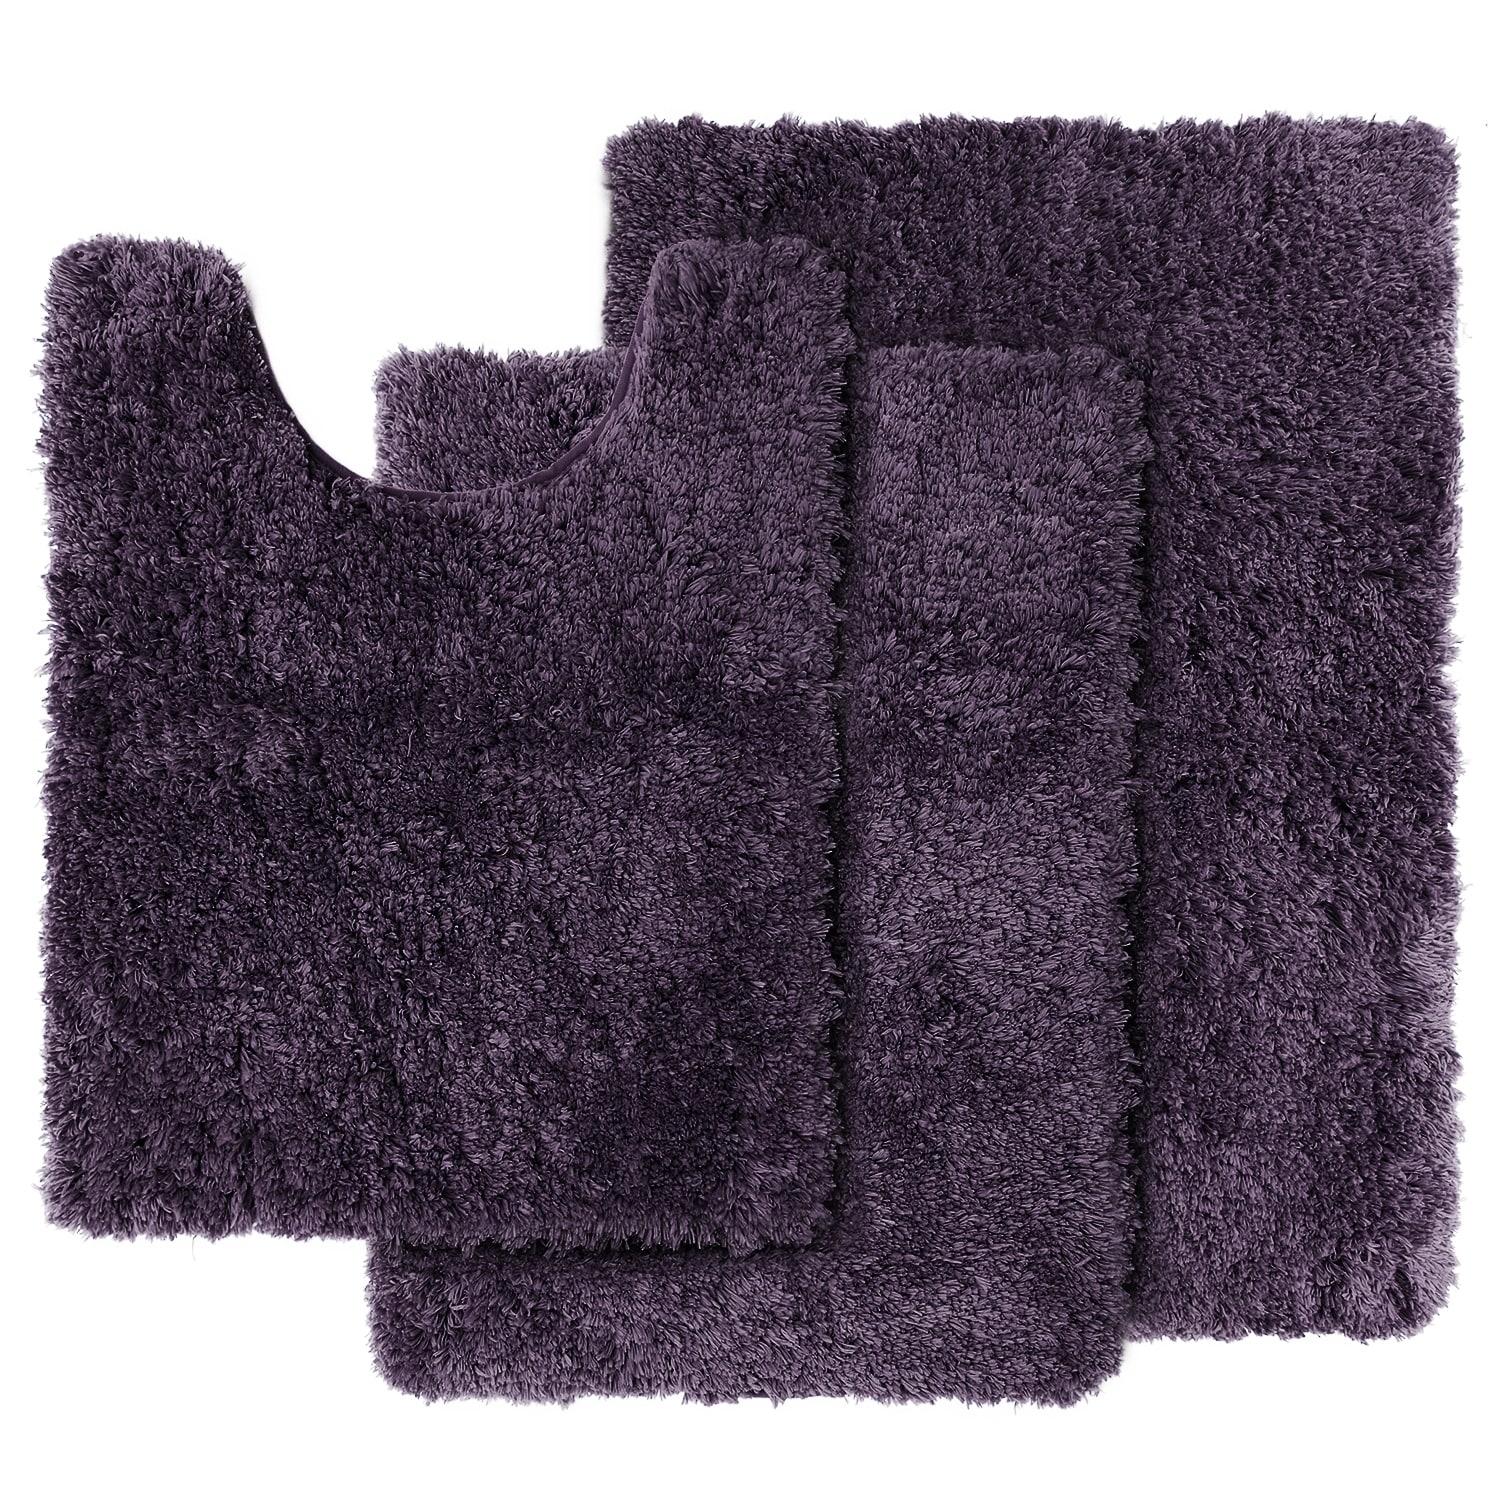 https://ak1.ostkcdn.com/images/products/is/images/direct/69360dbe67d46a3c729daae4caef8ca42db8a7d7/Clara-Clark-Shaggy-Bath-Rug-with-Non-Slip-Backing-Rubber---3-Piece-Set.jpg